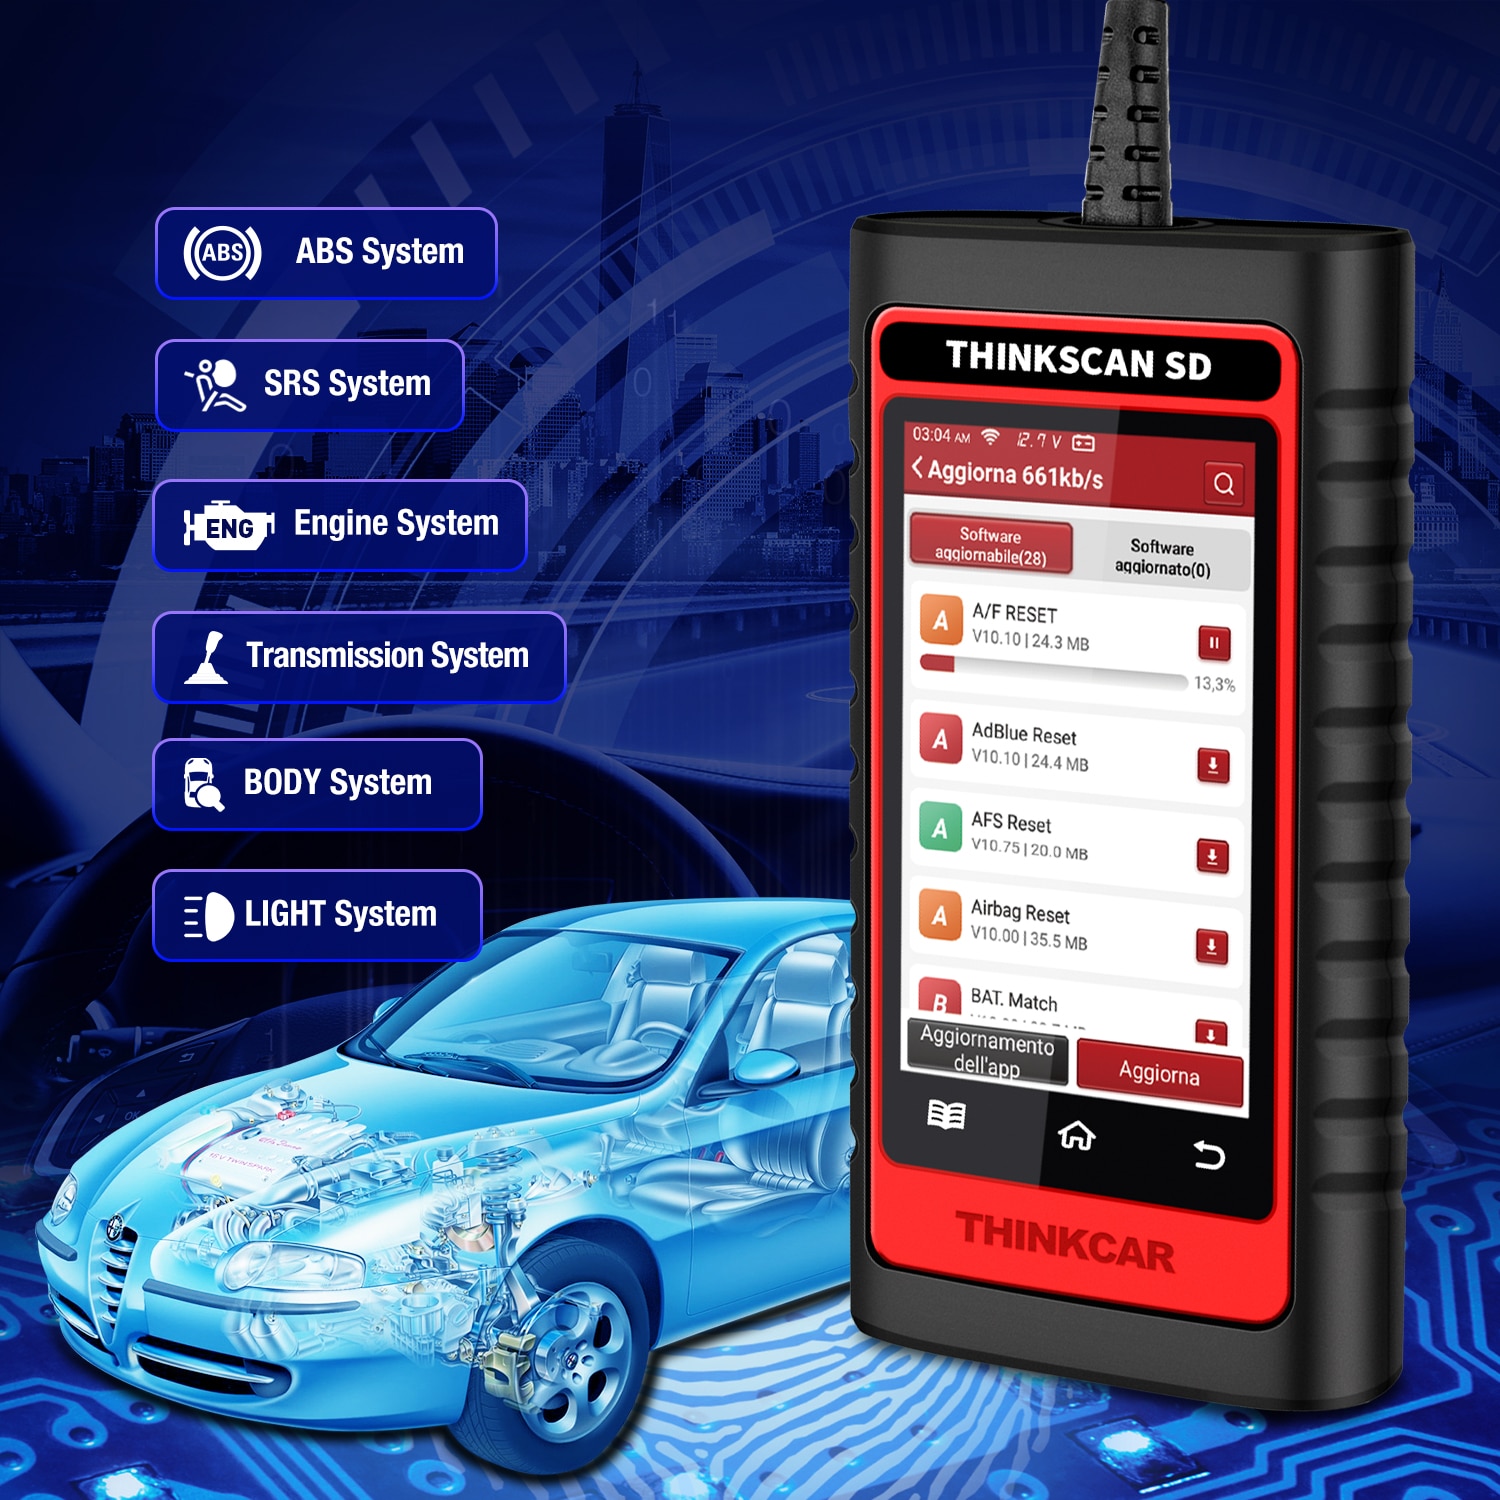 THINKCAR-Thinkscan-SD2-OBD2-Scanner-Resets-Full-System-Car-Diagnostic-Tool-Code-Reader-Professional-Scanner-Tool-1005003117506270